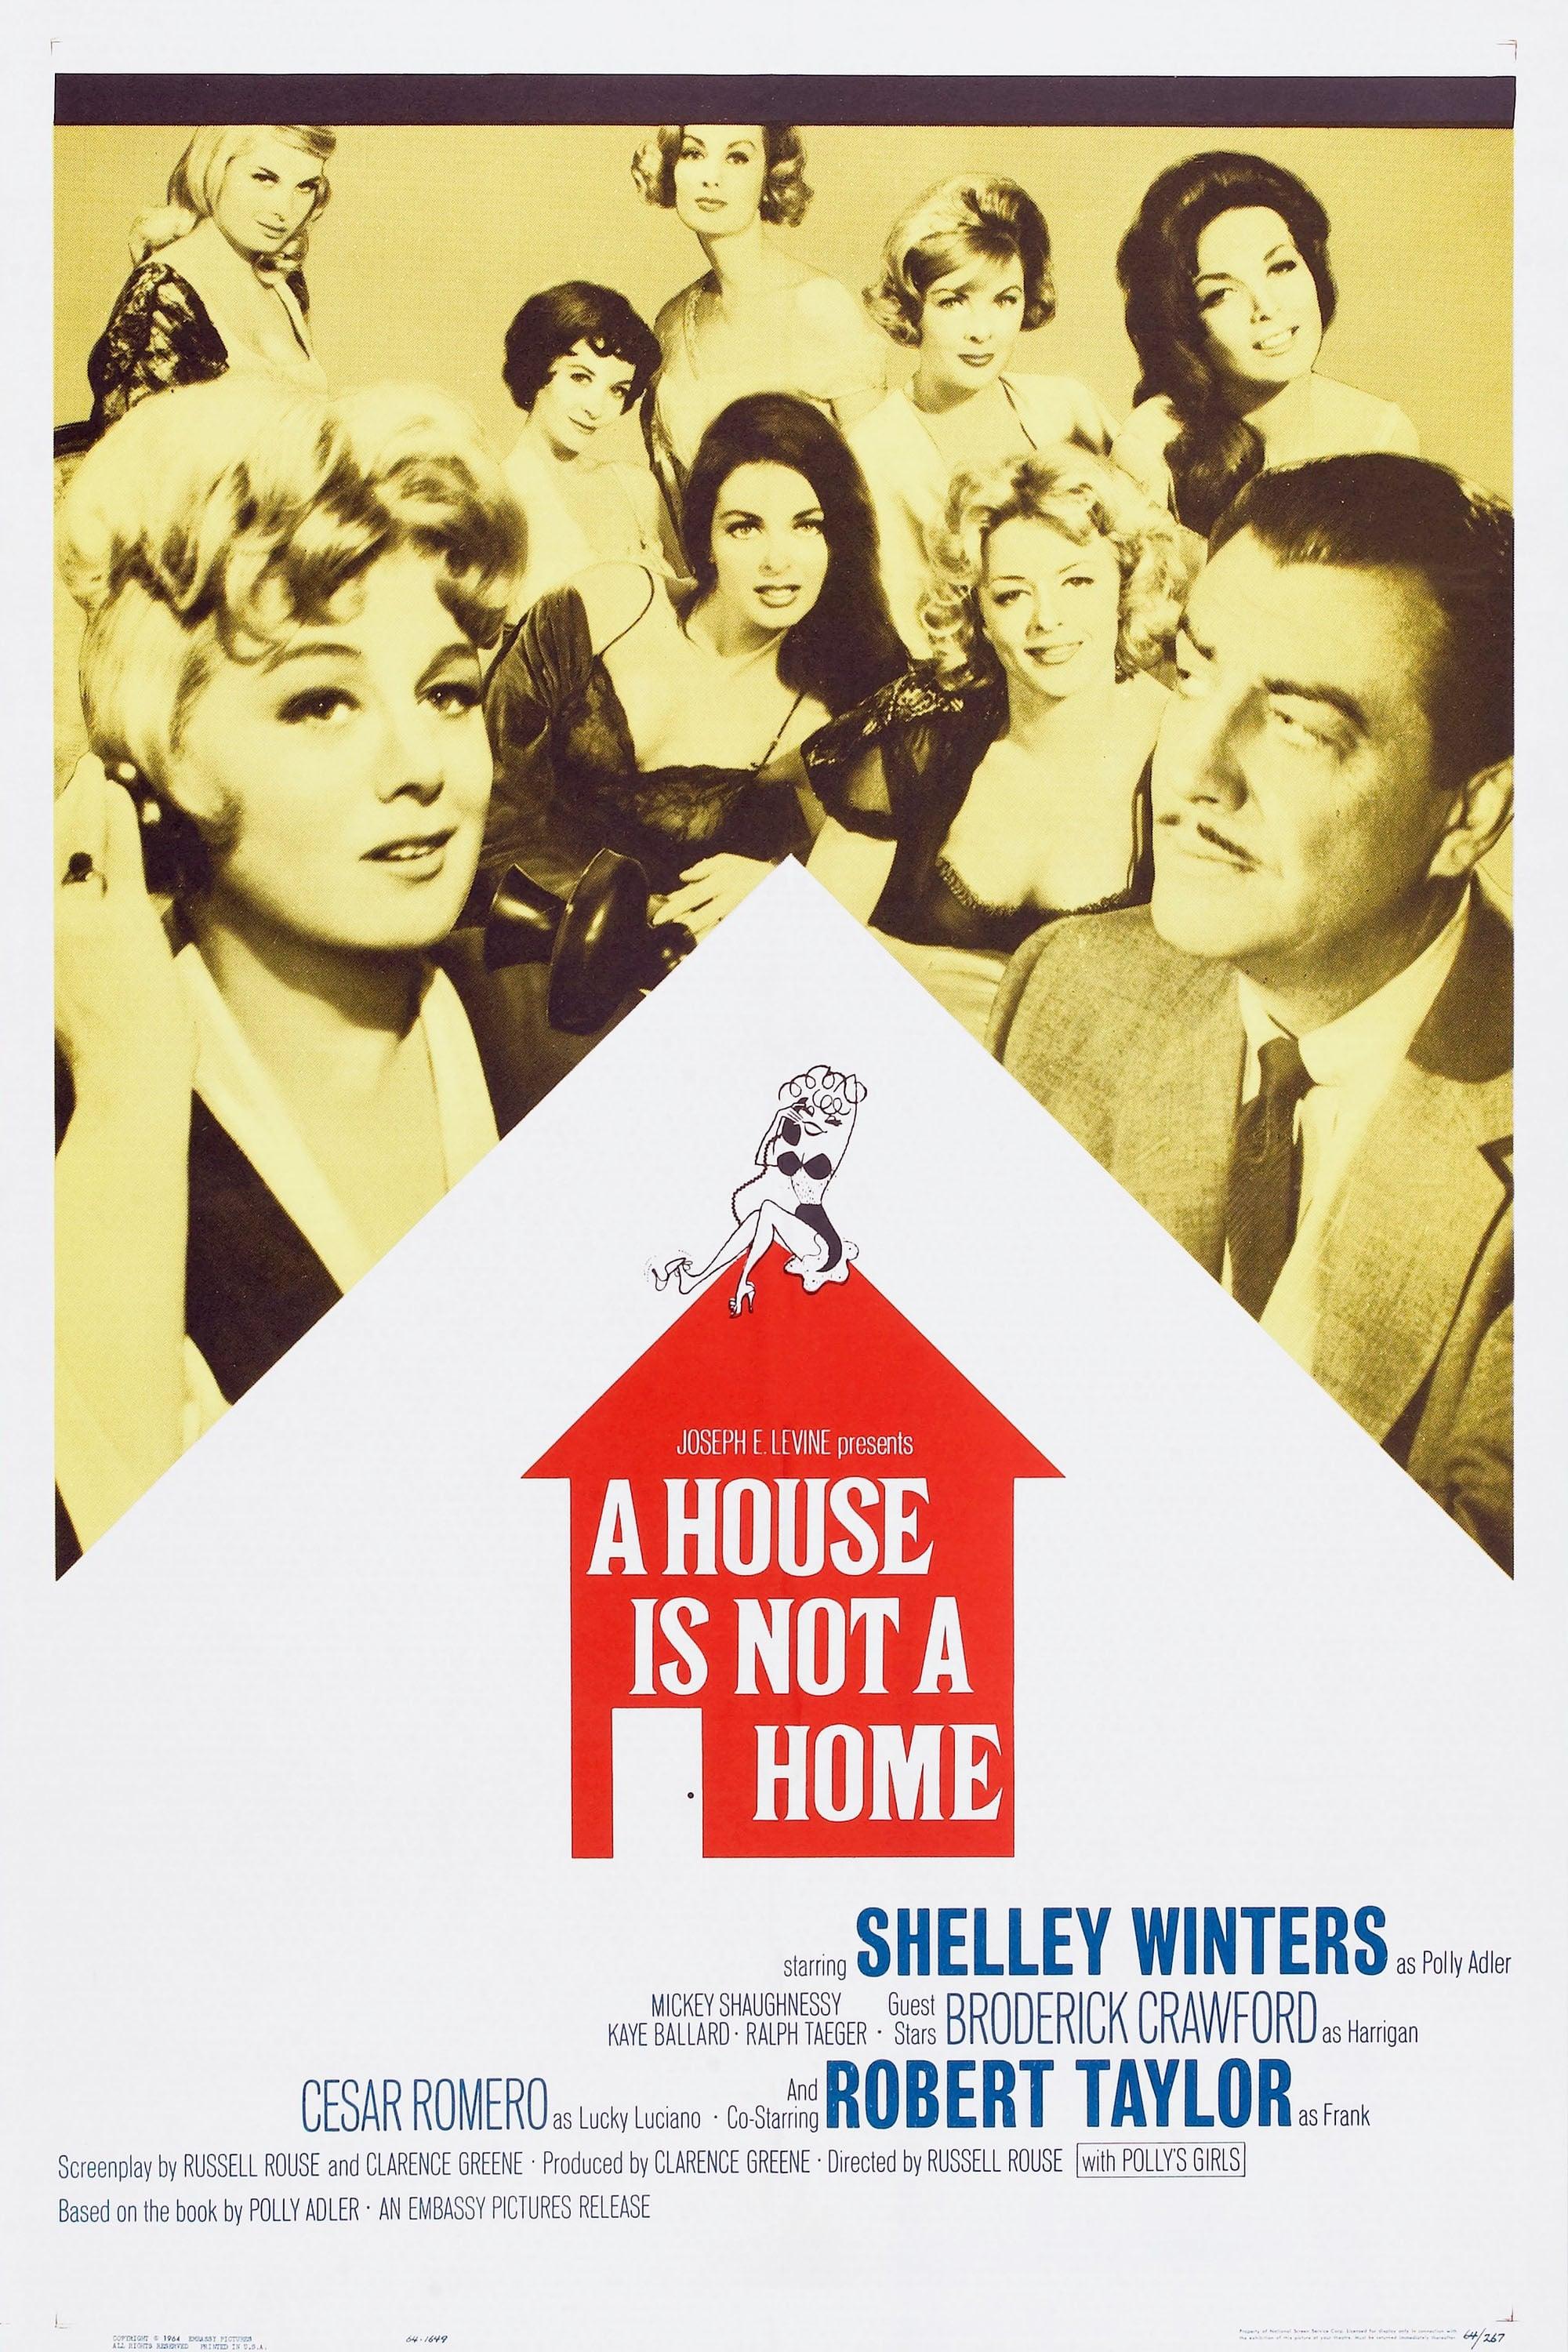 A House Is Not a Home poster